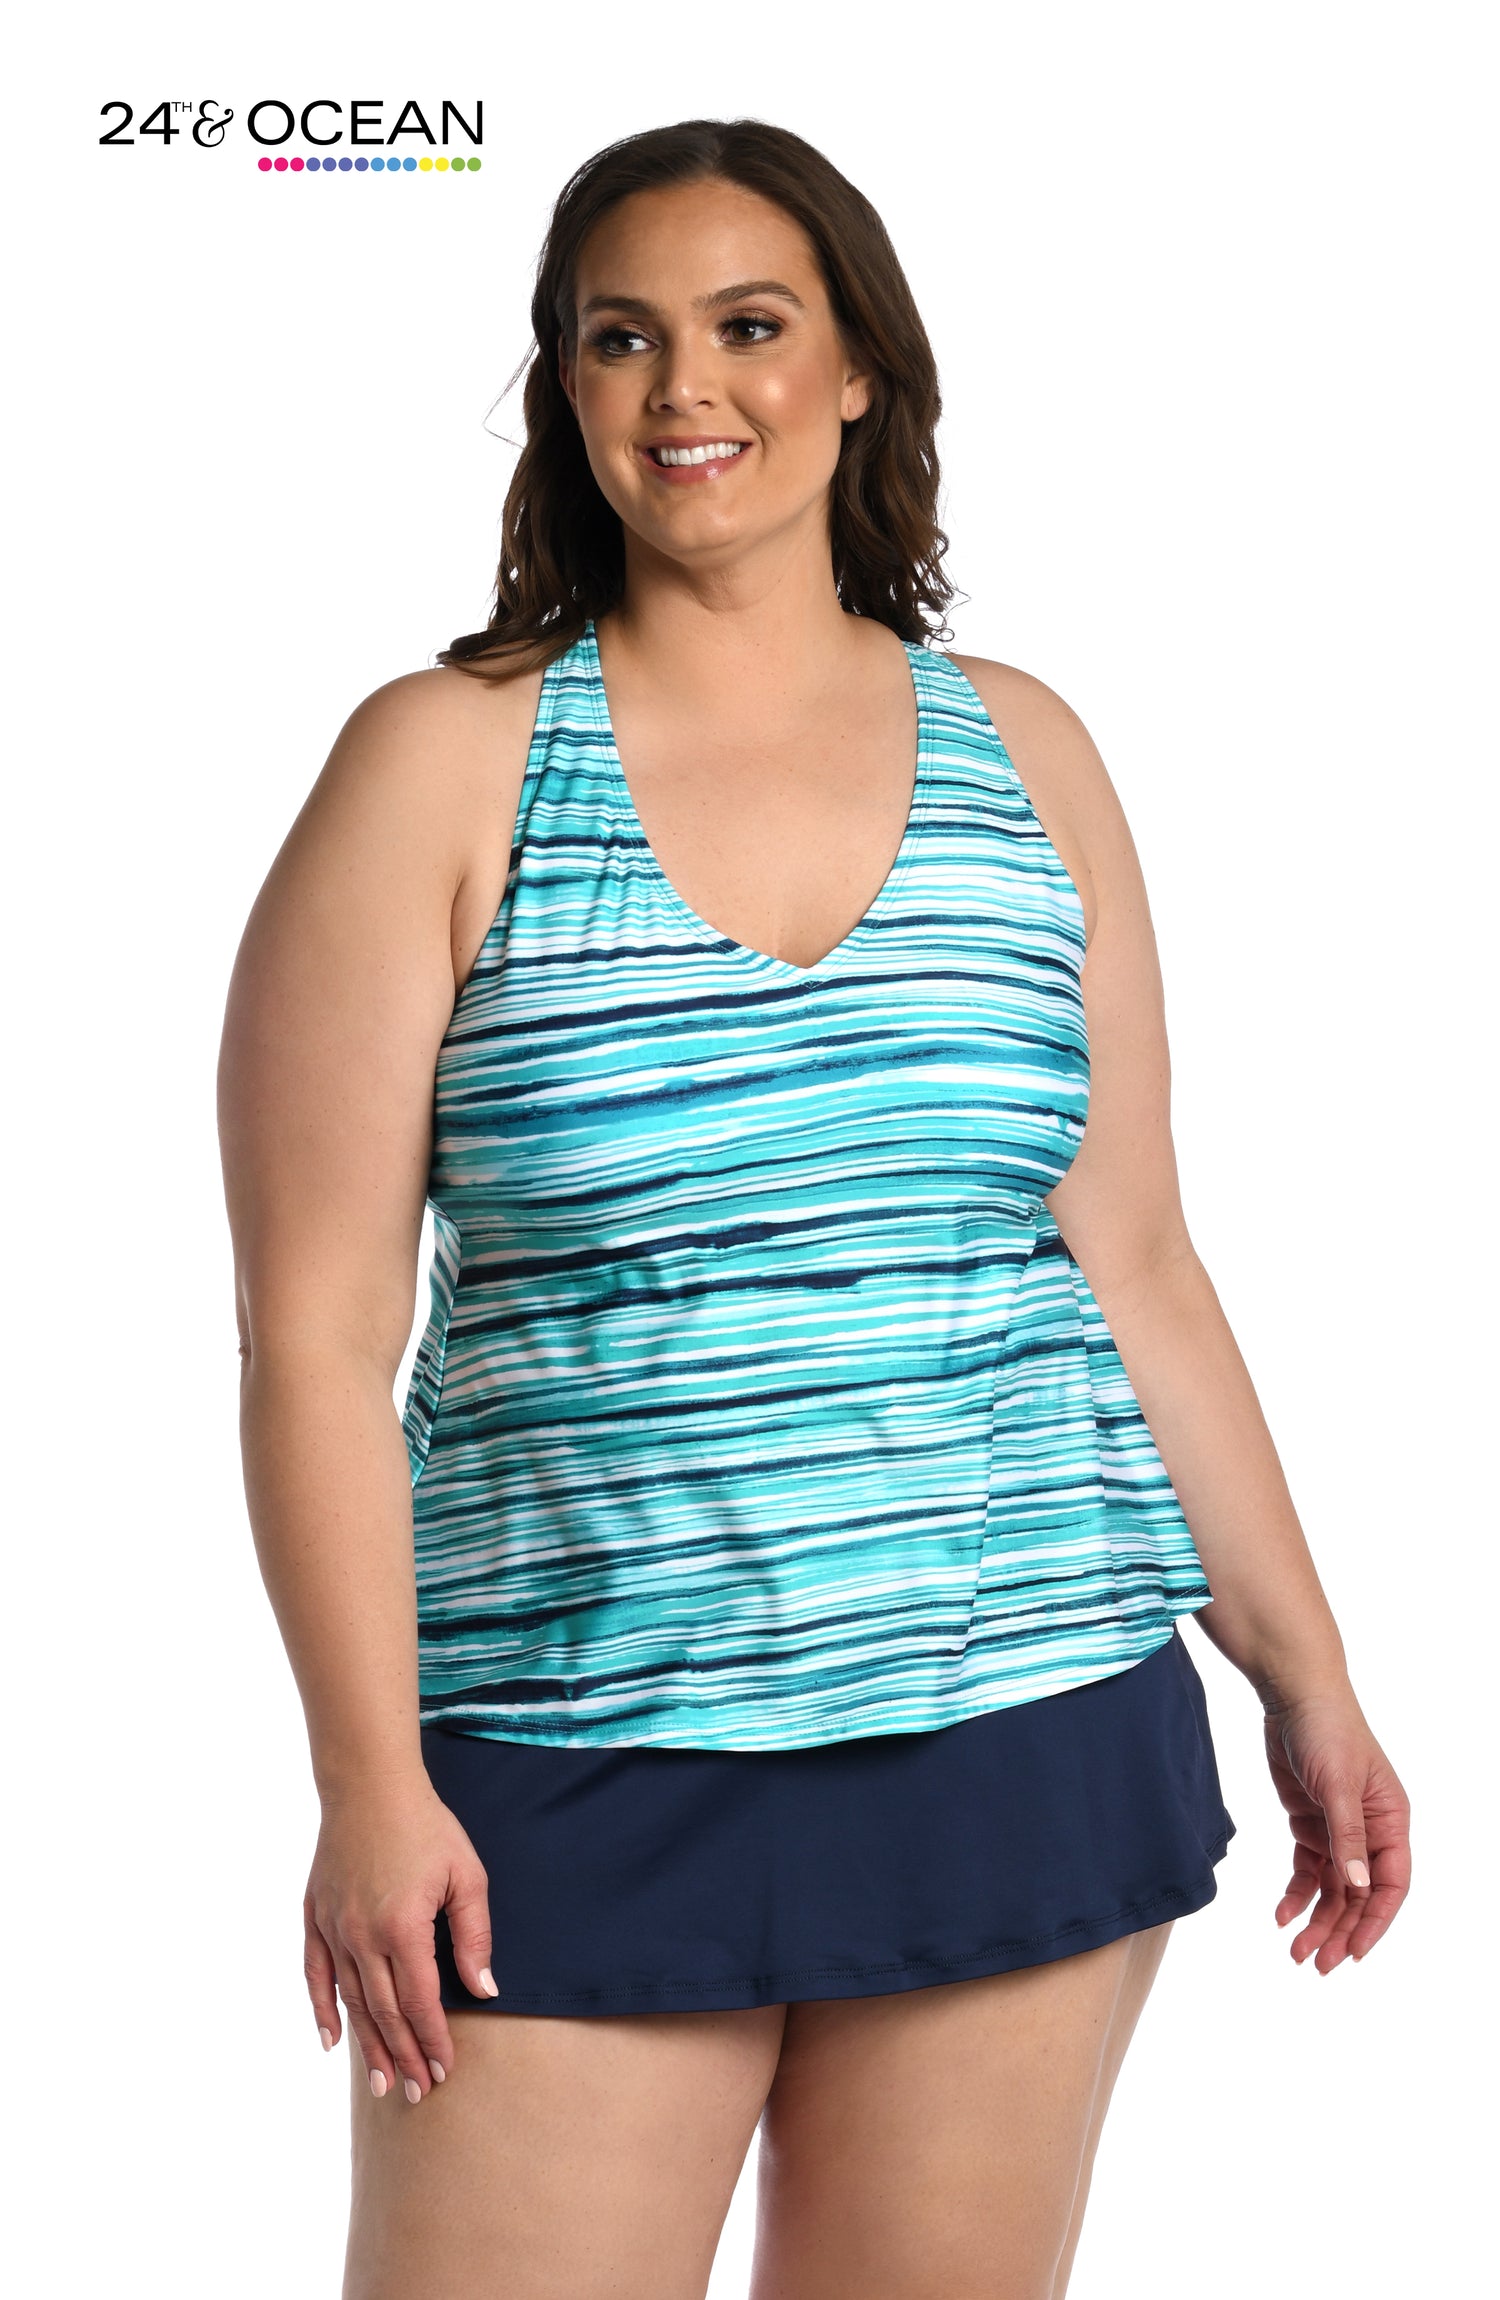 Model is wearing a teal multi colored striped printed over the shoulder tankini top from our Seaside Breeze collection!